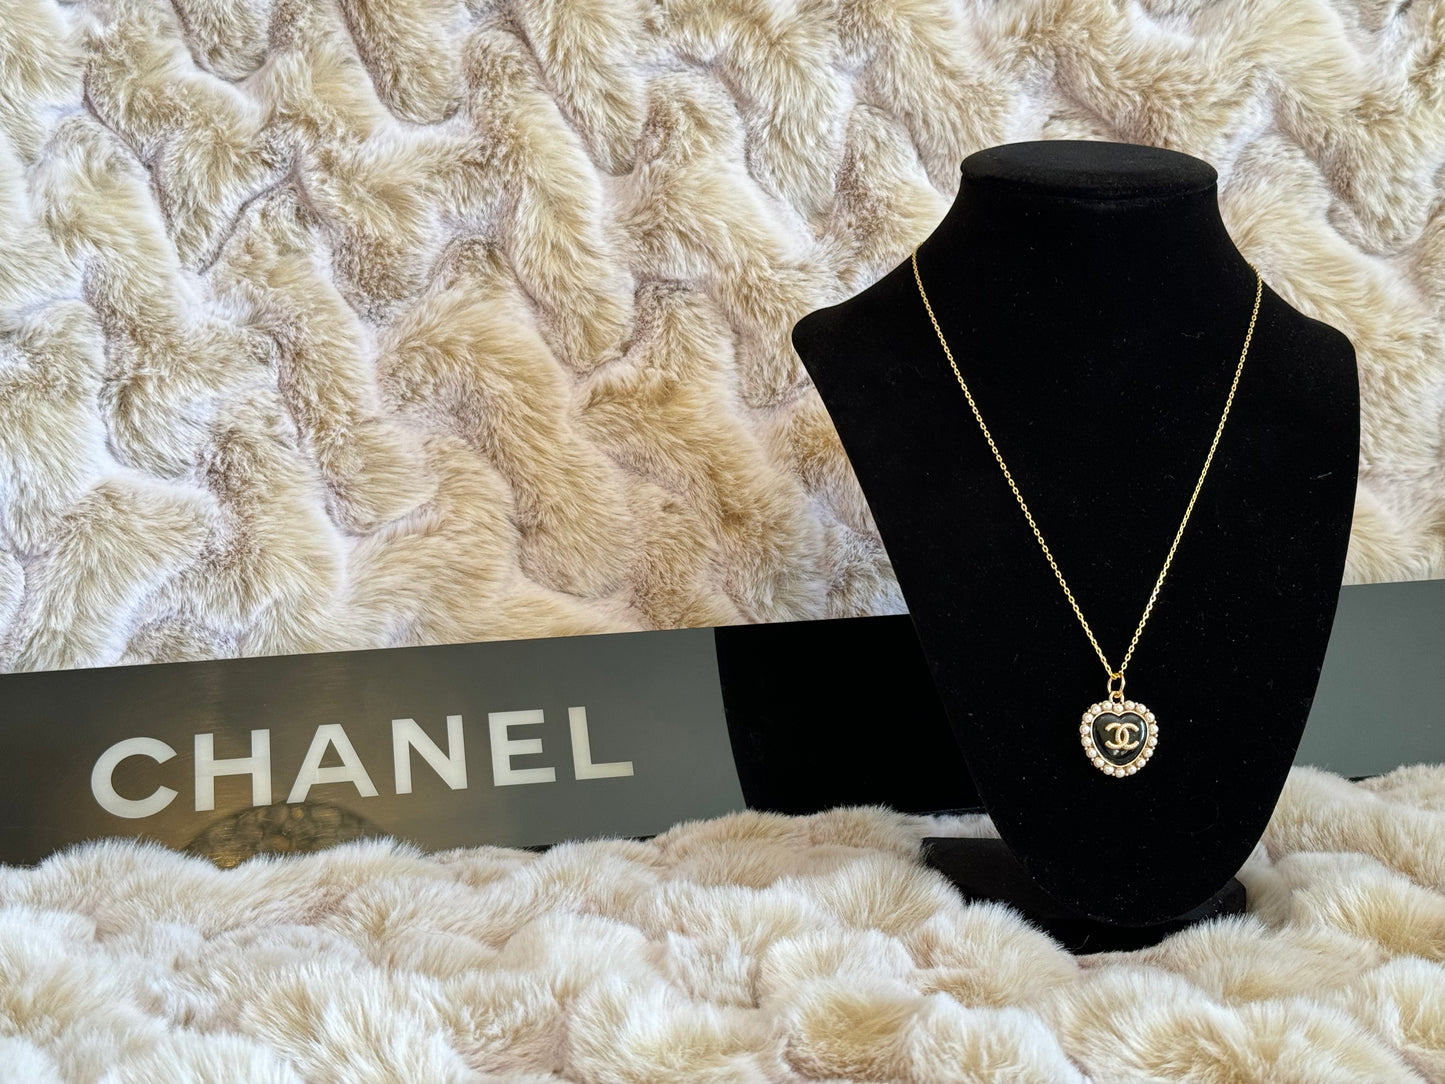 Repurposed Black & Faux Pearl Chanel Necklace